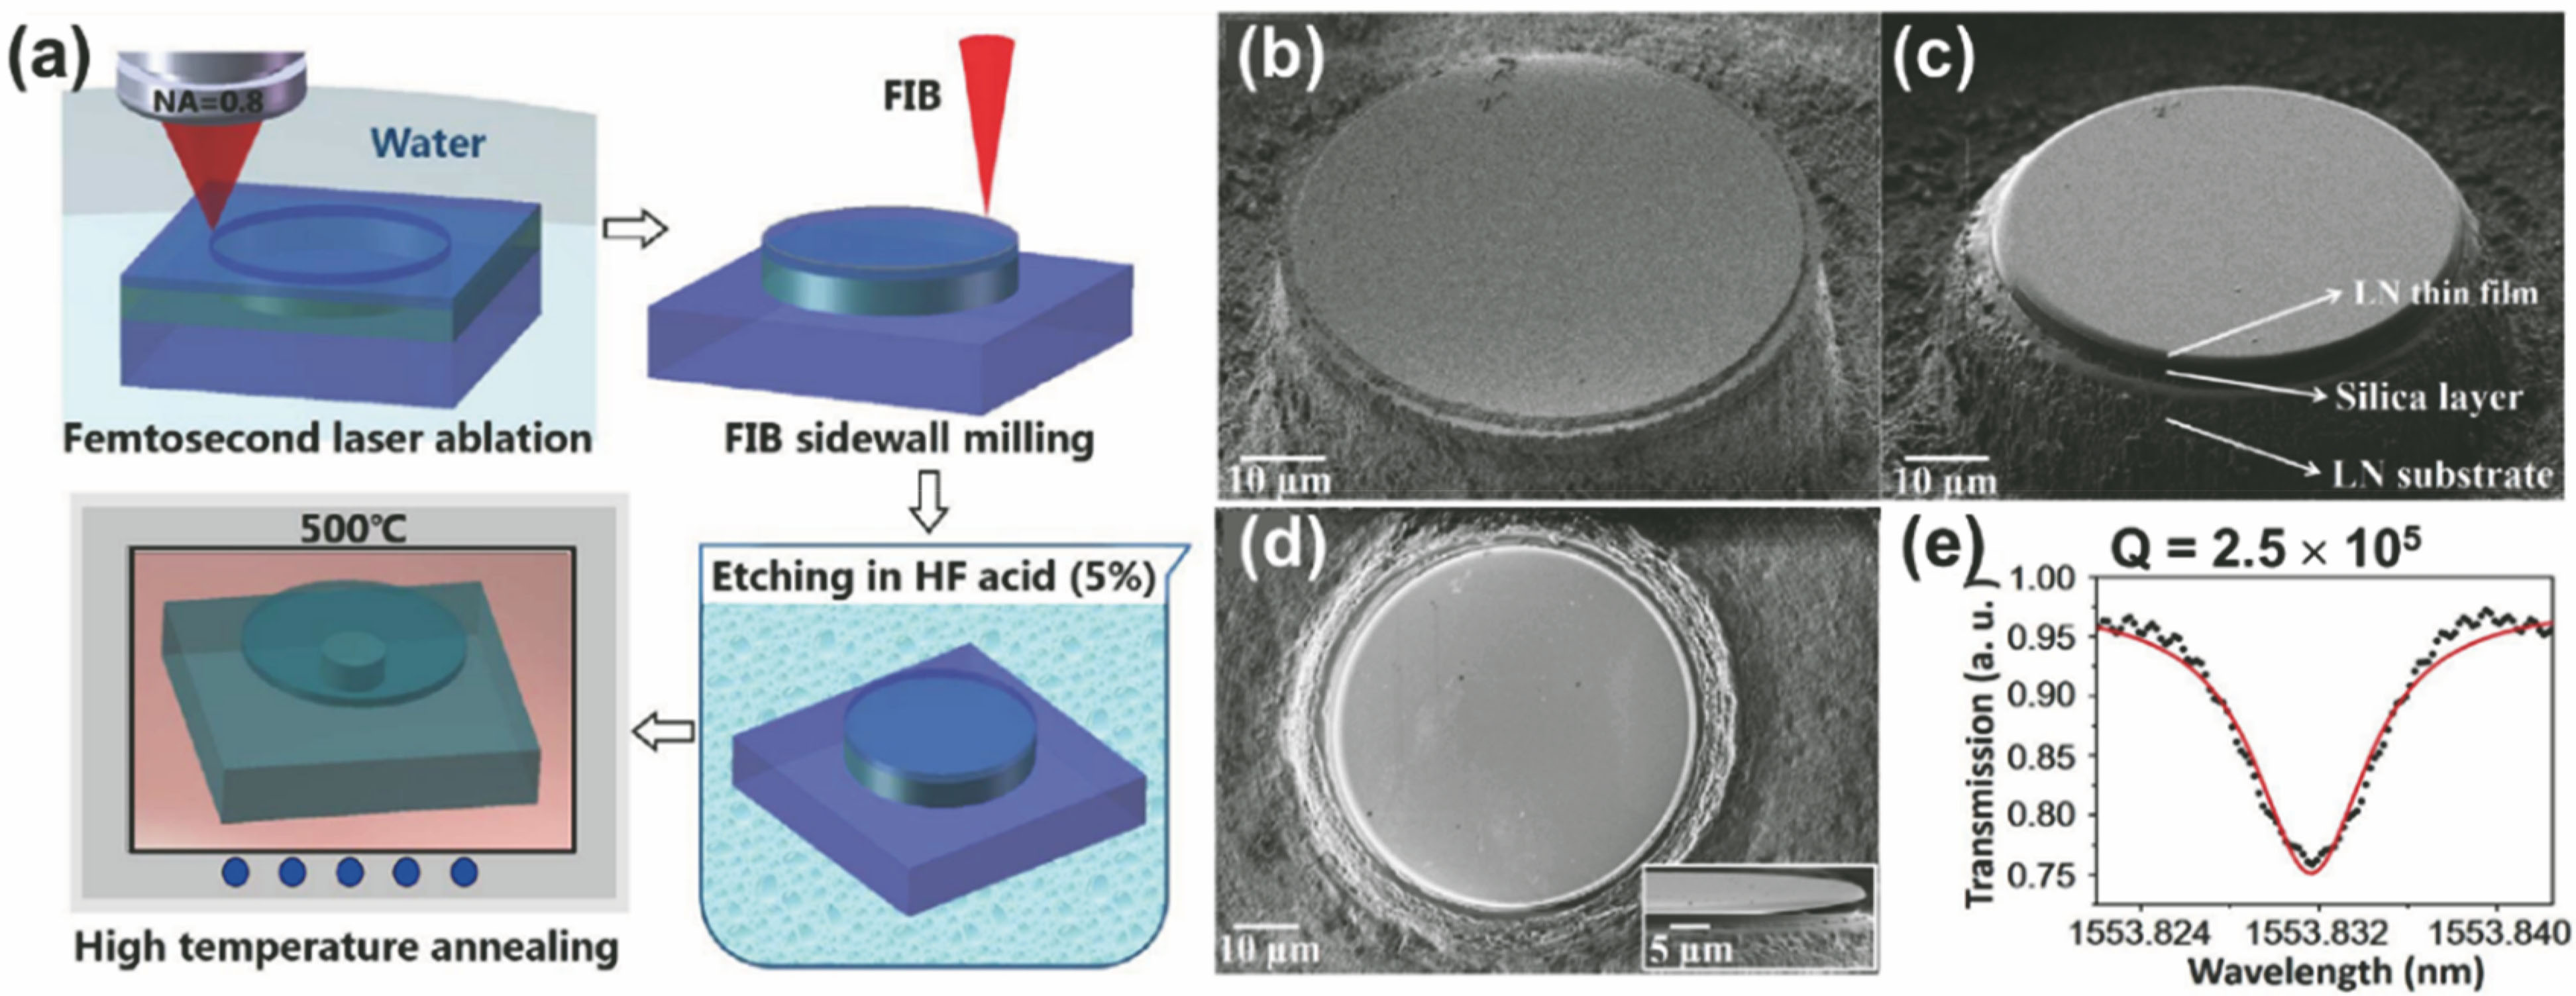 LN microresonator with high Q factor fabricated by the femtosecond laser writing combined with focused ion beam milling[28-29]. (a) Procedures of fabrication of an LN microresonator; (b) SEM image of a cylindrical post formed after femtosecond laser ablation; (c) SEM image of a cylindrical post formed after the FIB milling; (d) SEM image (top view) of the 55-μm diameter microresonator after the chemical etching and high temperature annealing, in which the inset is side view of the microresonator; (e) measured transmission spectrum (dotted line) and its Lorentzian fitting curve (solid line) around the resonant wavelength of 1553.83 nm